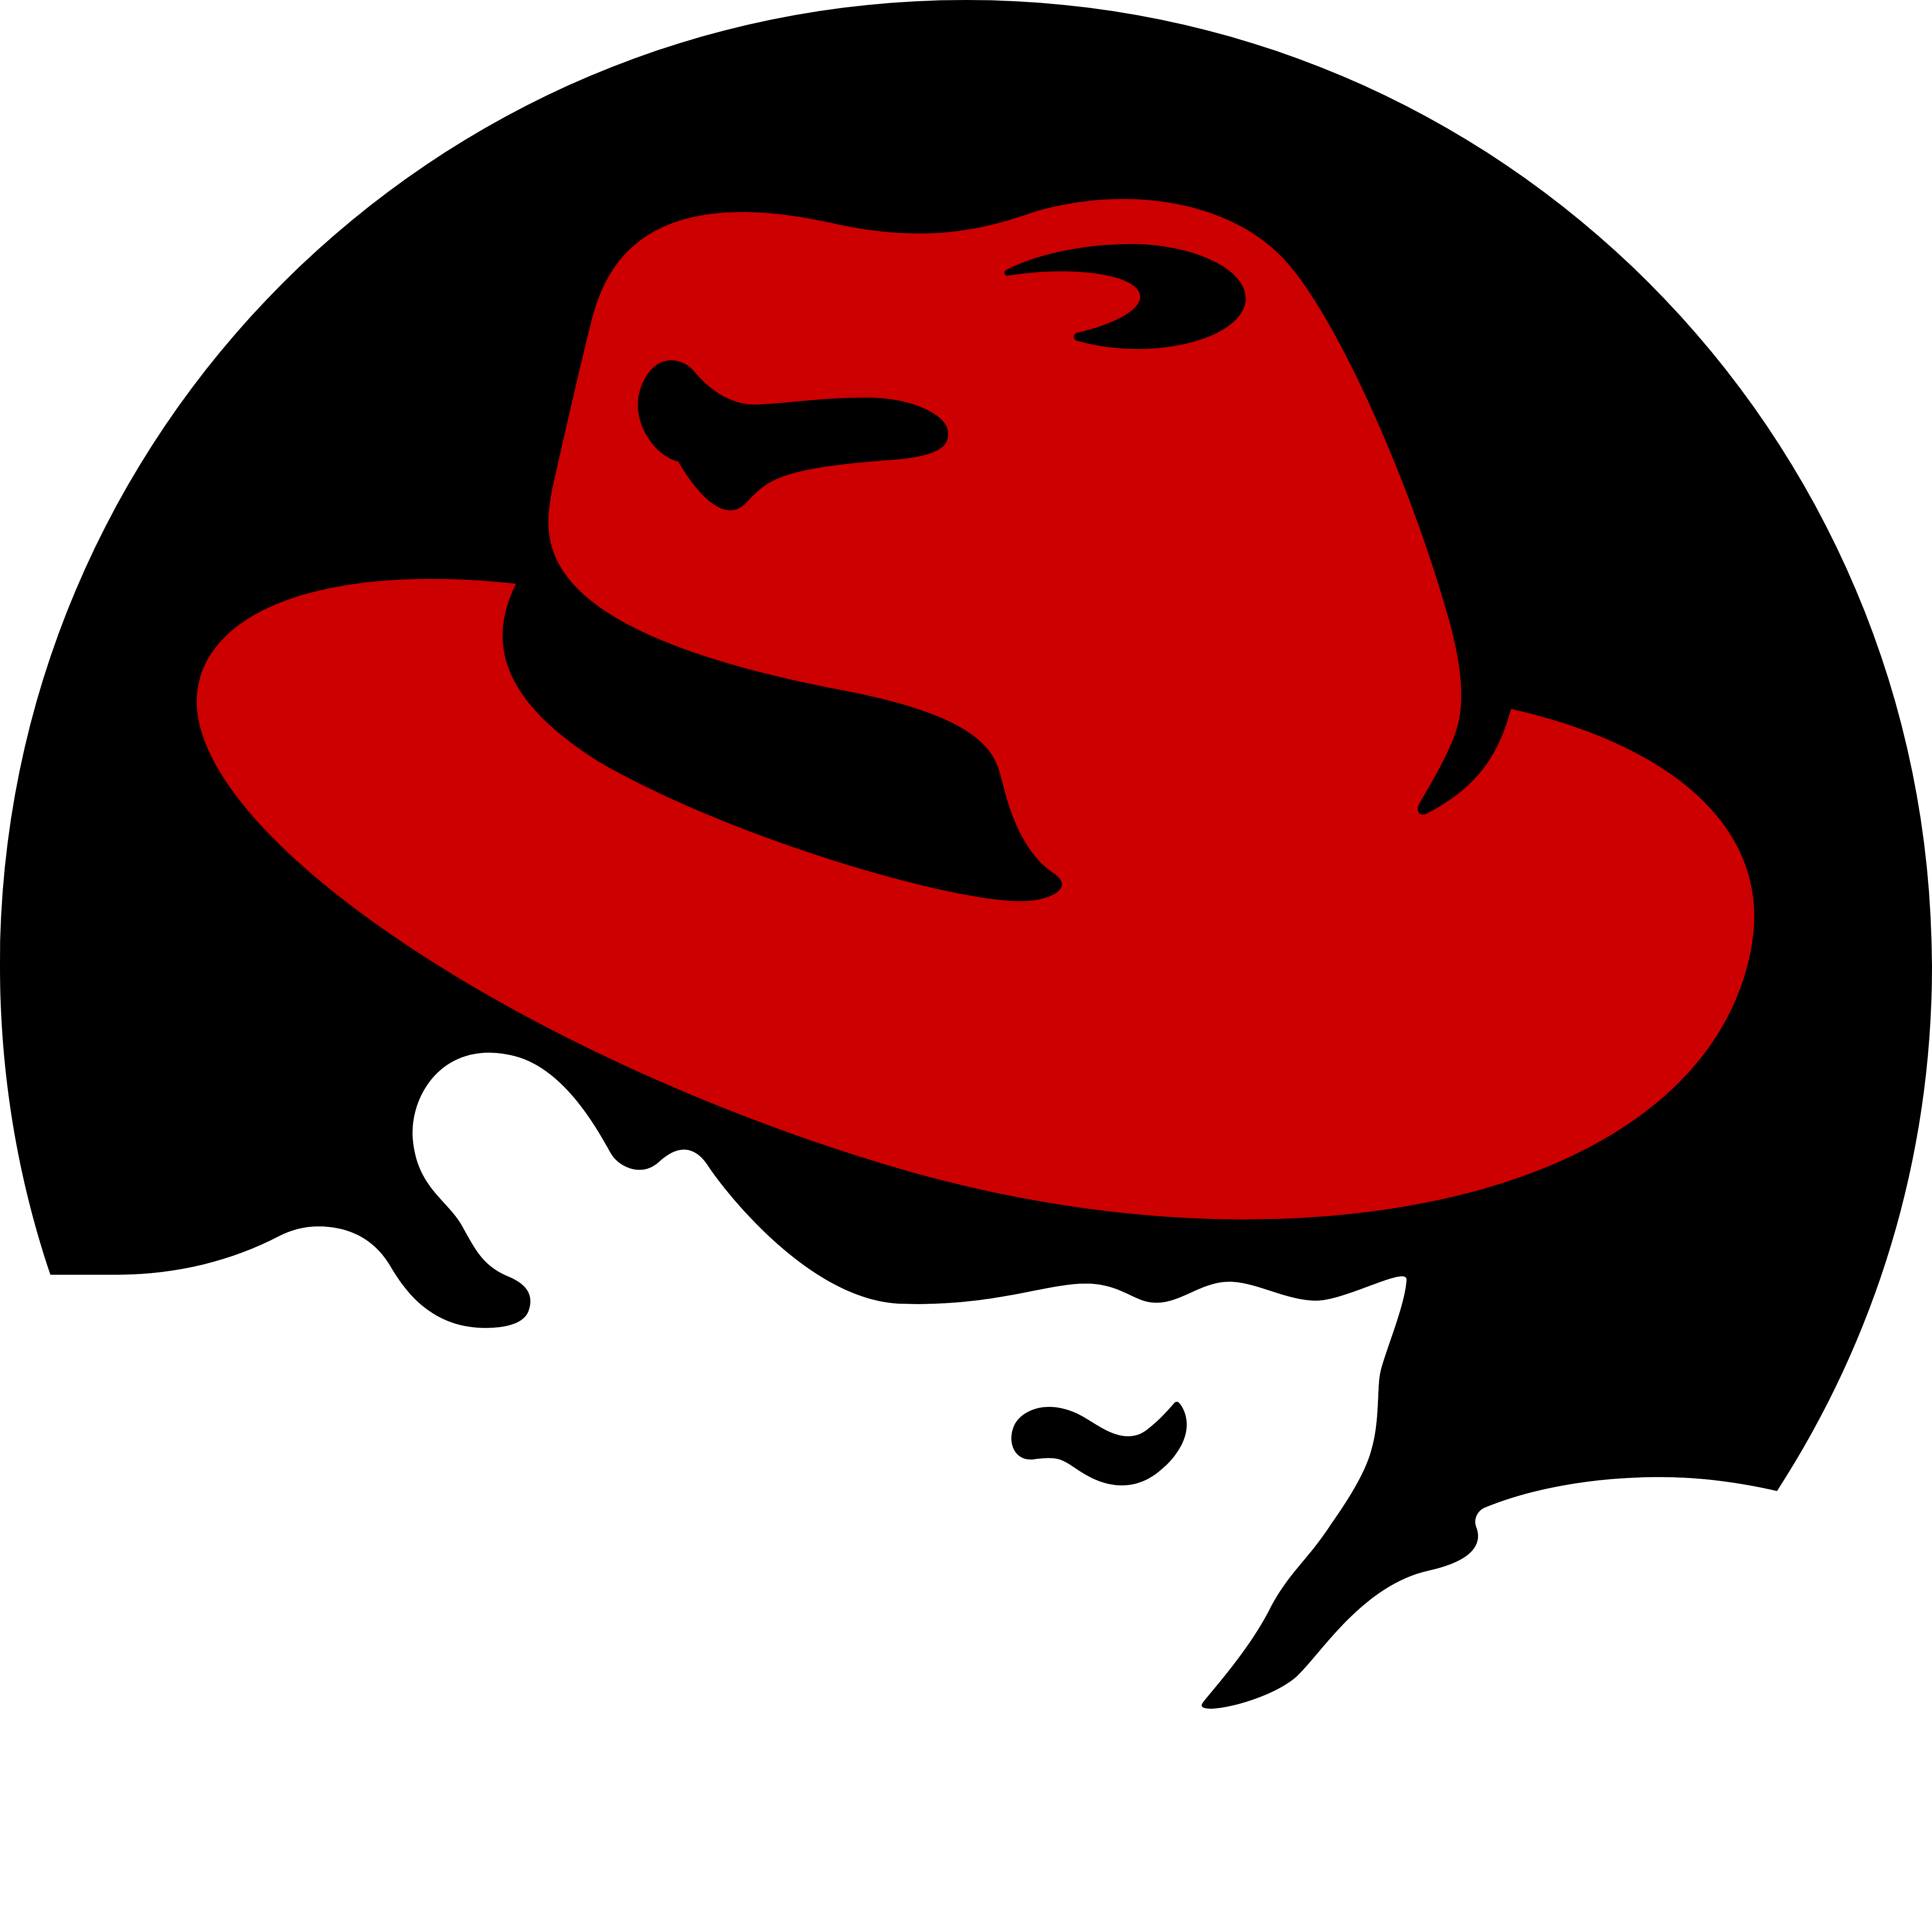 Red hat 2. Red hat лого. Ред хат линукс. Red hat Linux logo. Дистрибутивы Linux Red hat.